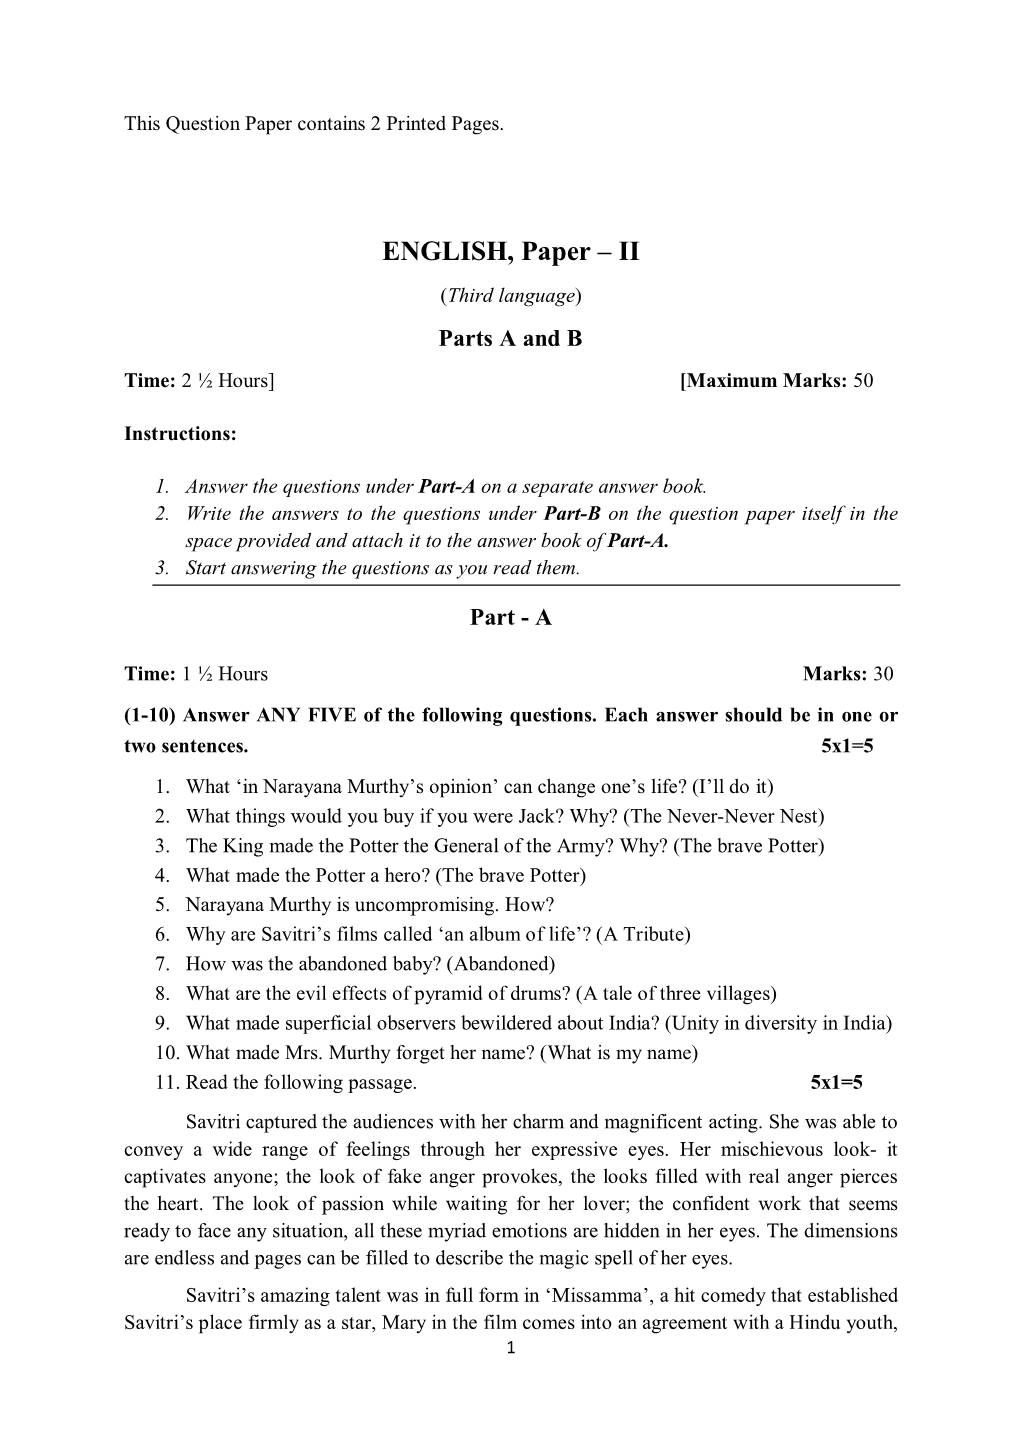 ENGLISH, Paper – II (Third Language) Parts a and B Time: 2 ½ Hours] [Maximum Marks: 50